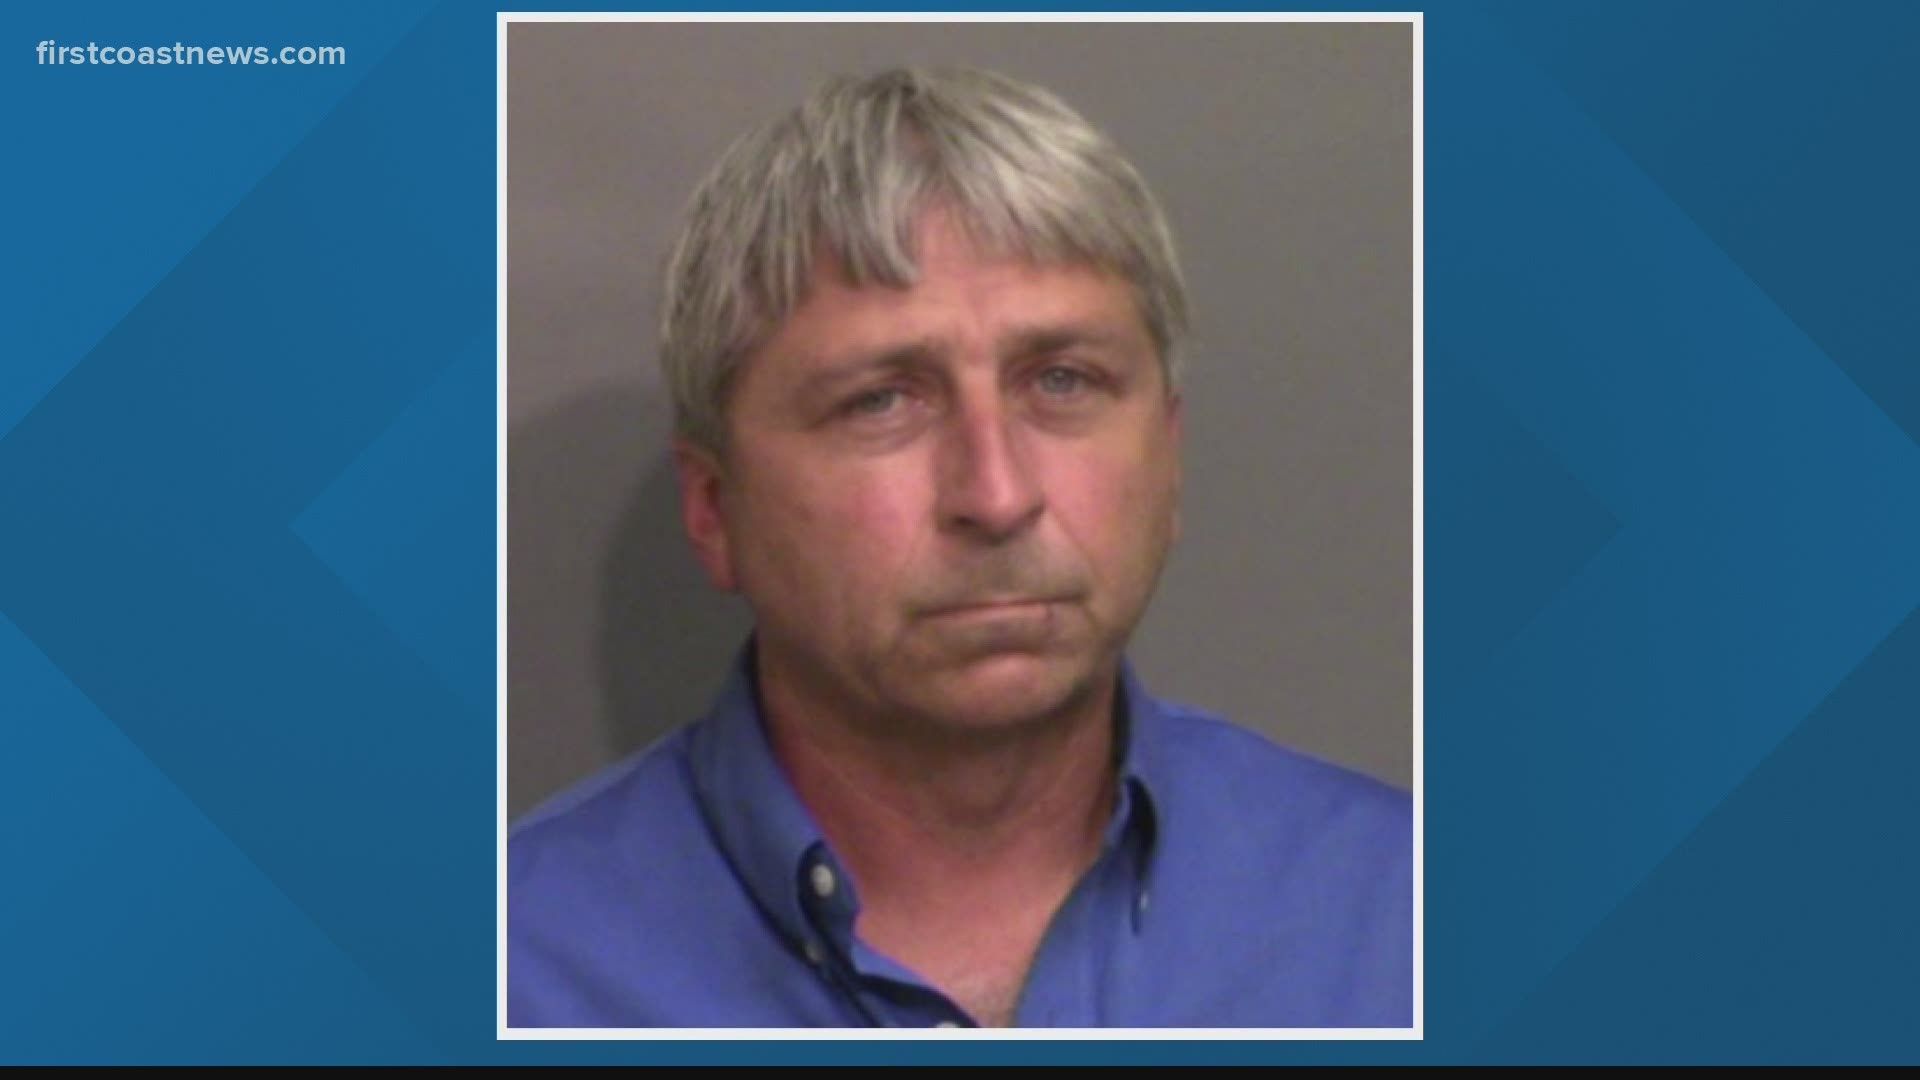 According to public records from the GBI, William Roddie Bryan Jr. is the subject of a sex crimes investigation, specifically a child molestation investigation.